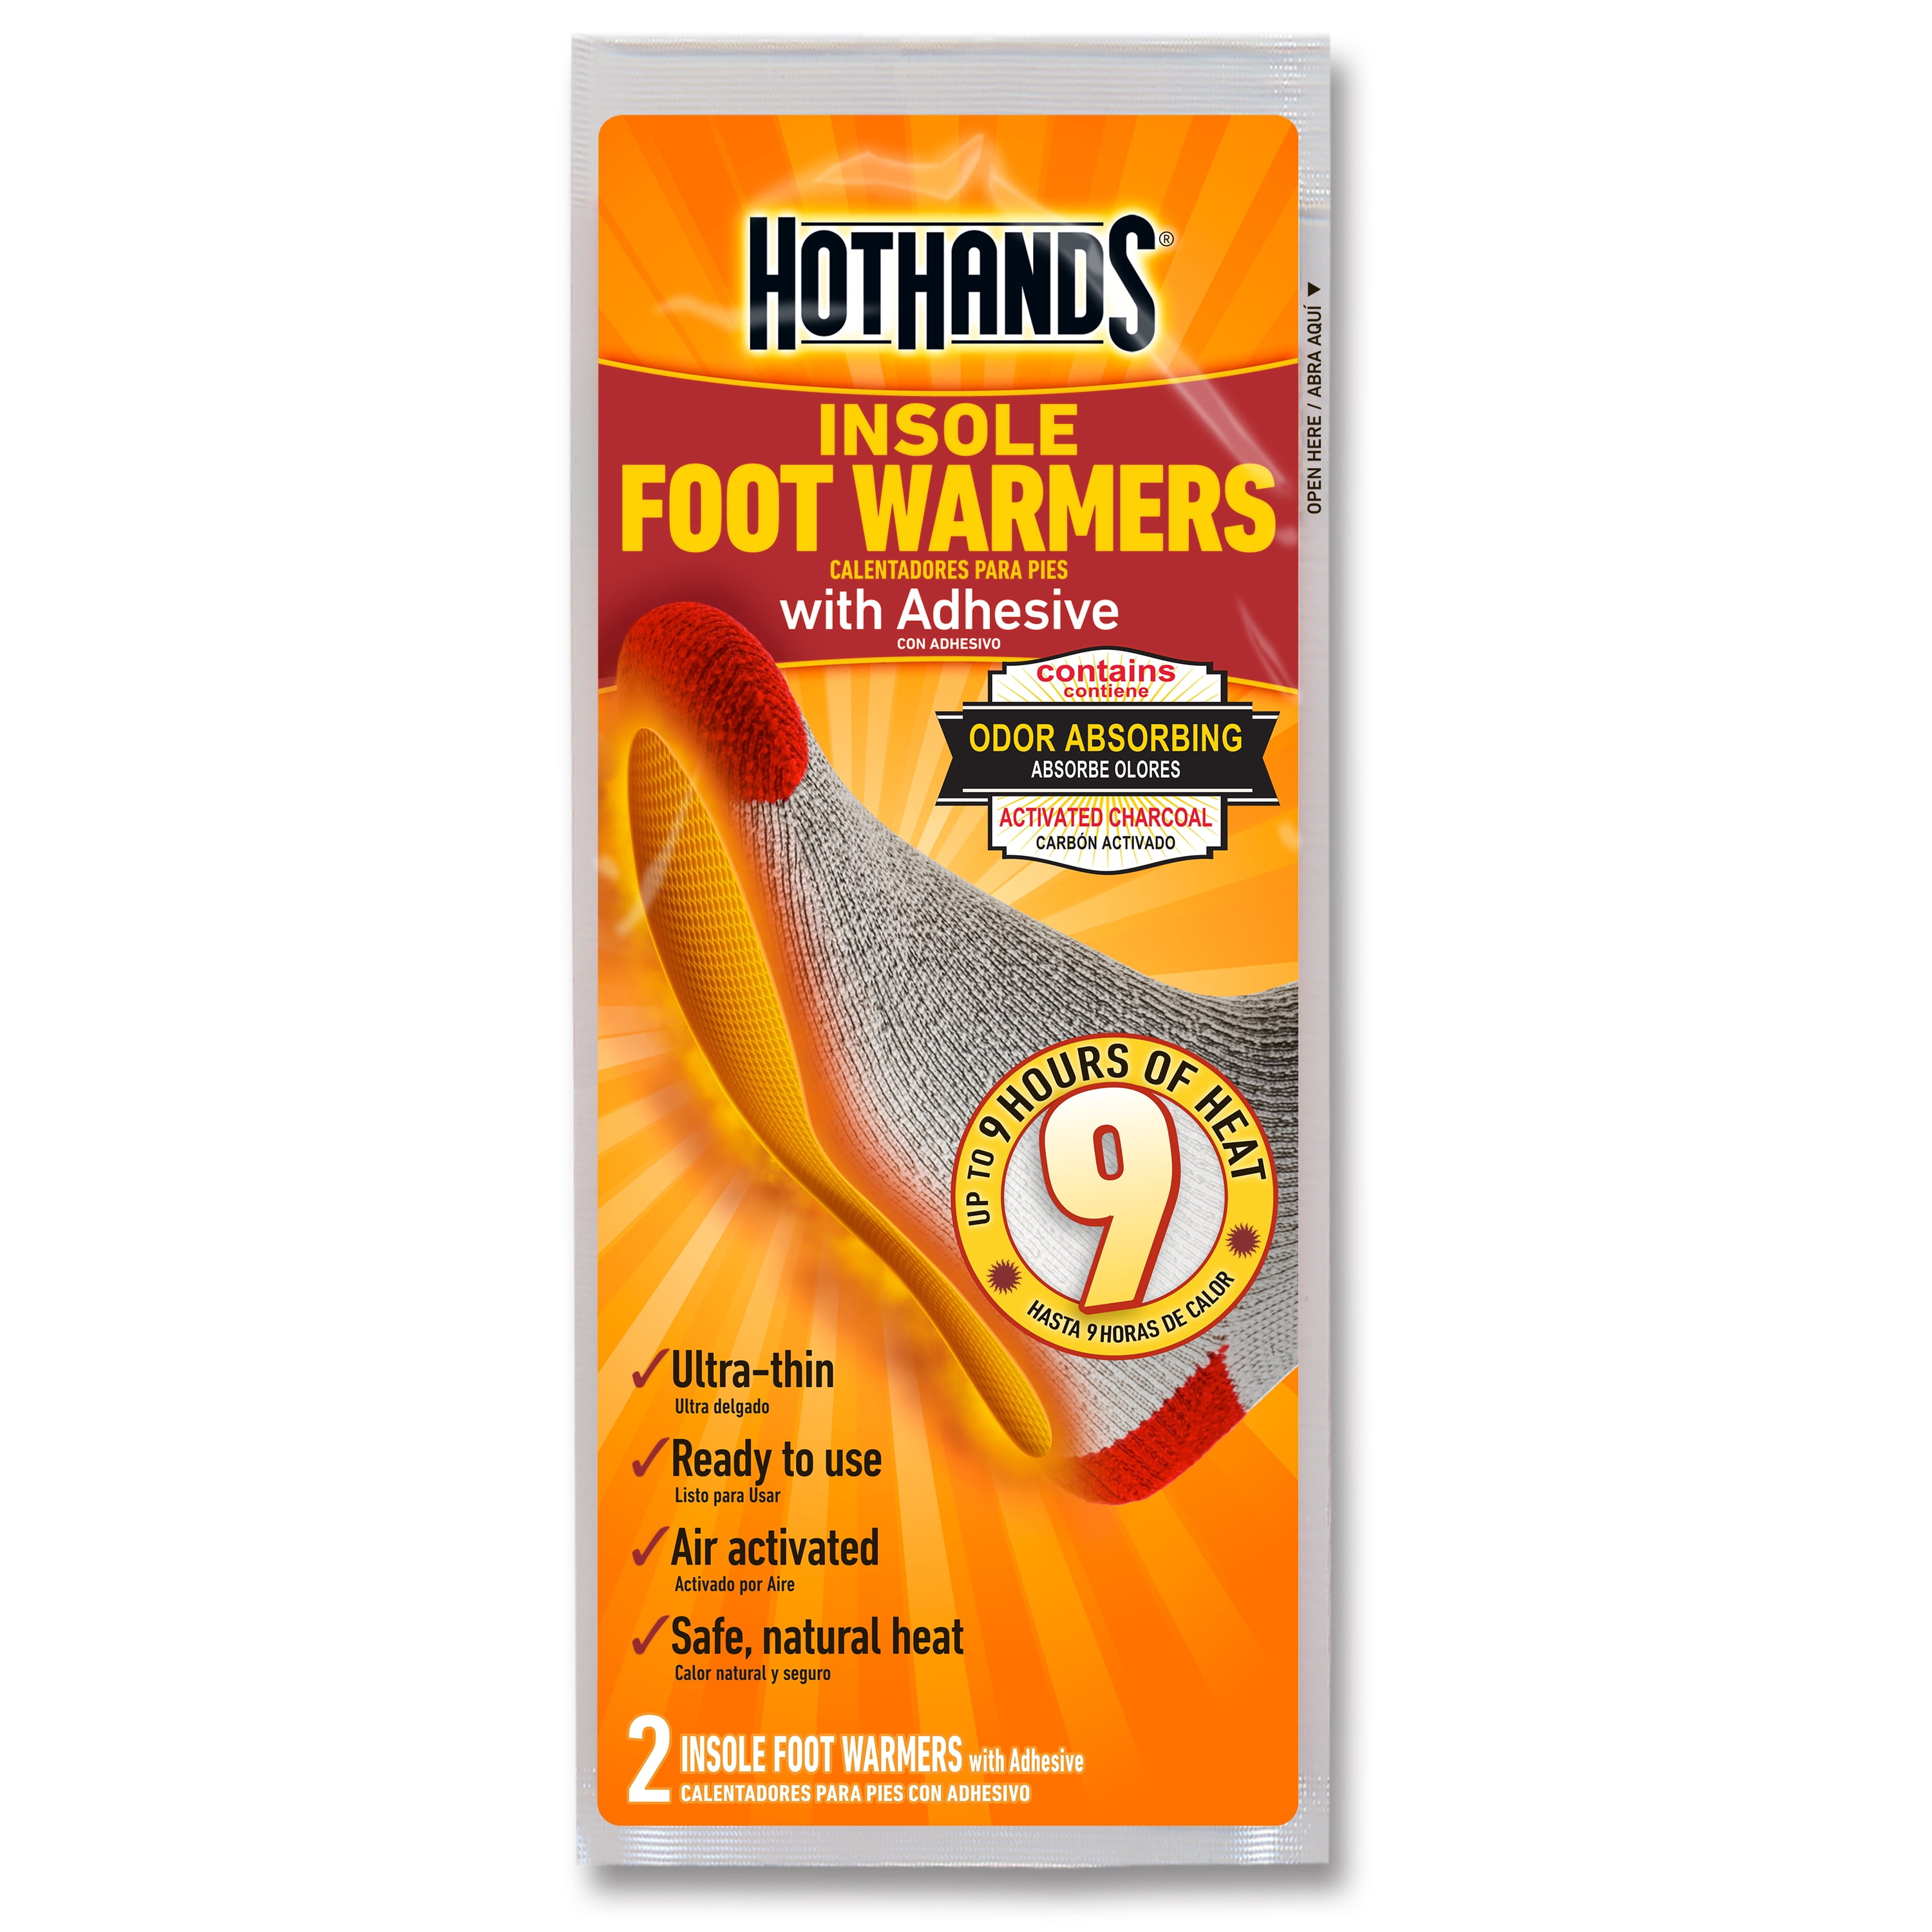 HotHands Body Warmer With Adhesive Value 8 Pack 12 Hour Packets Exp 11/22 for sale online 